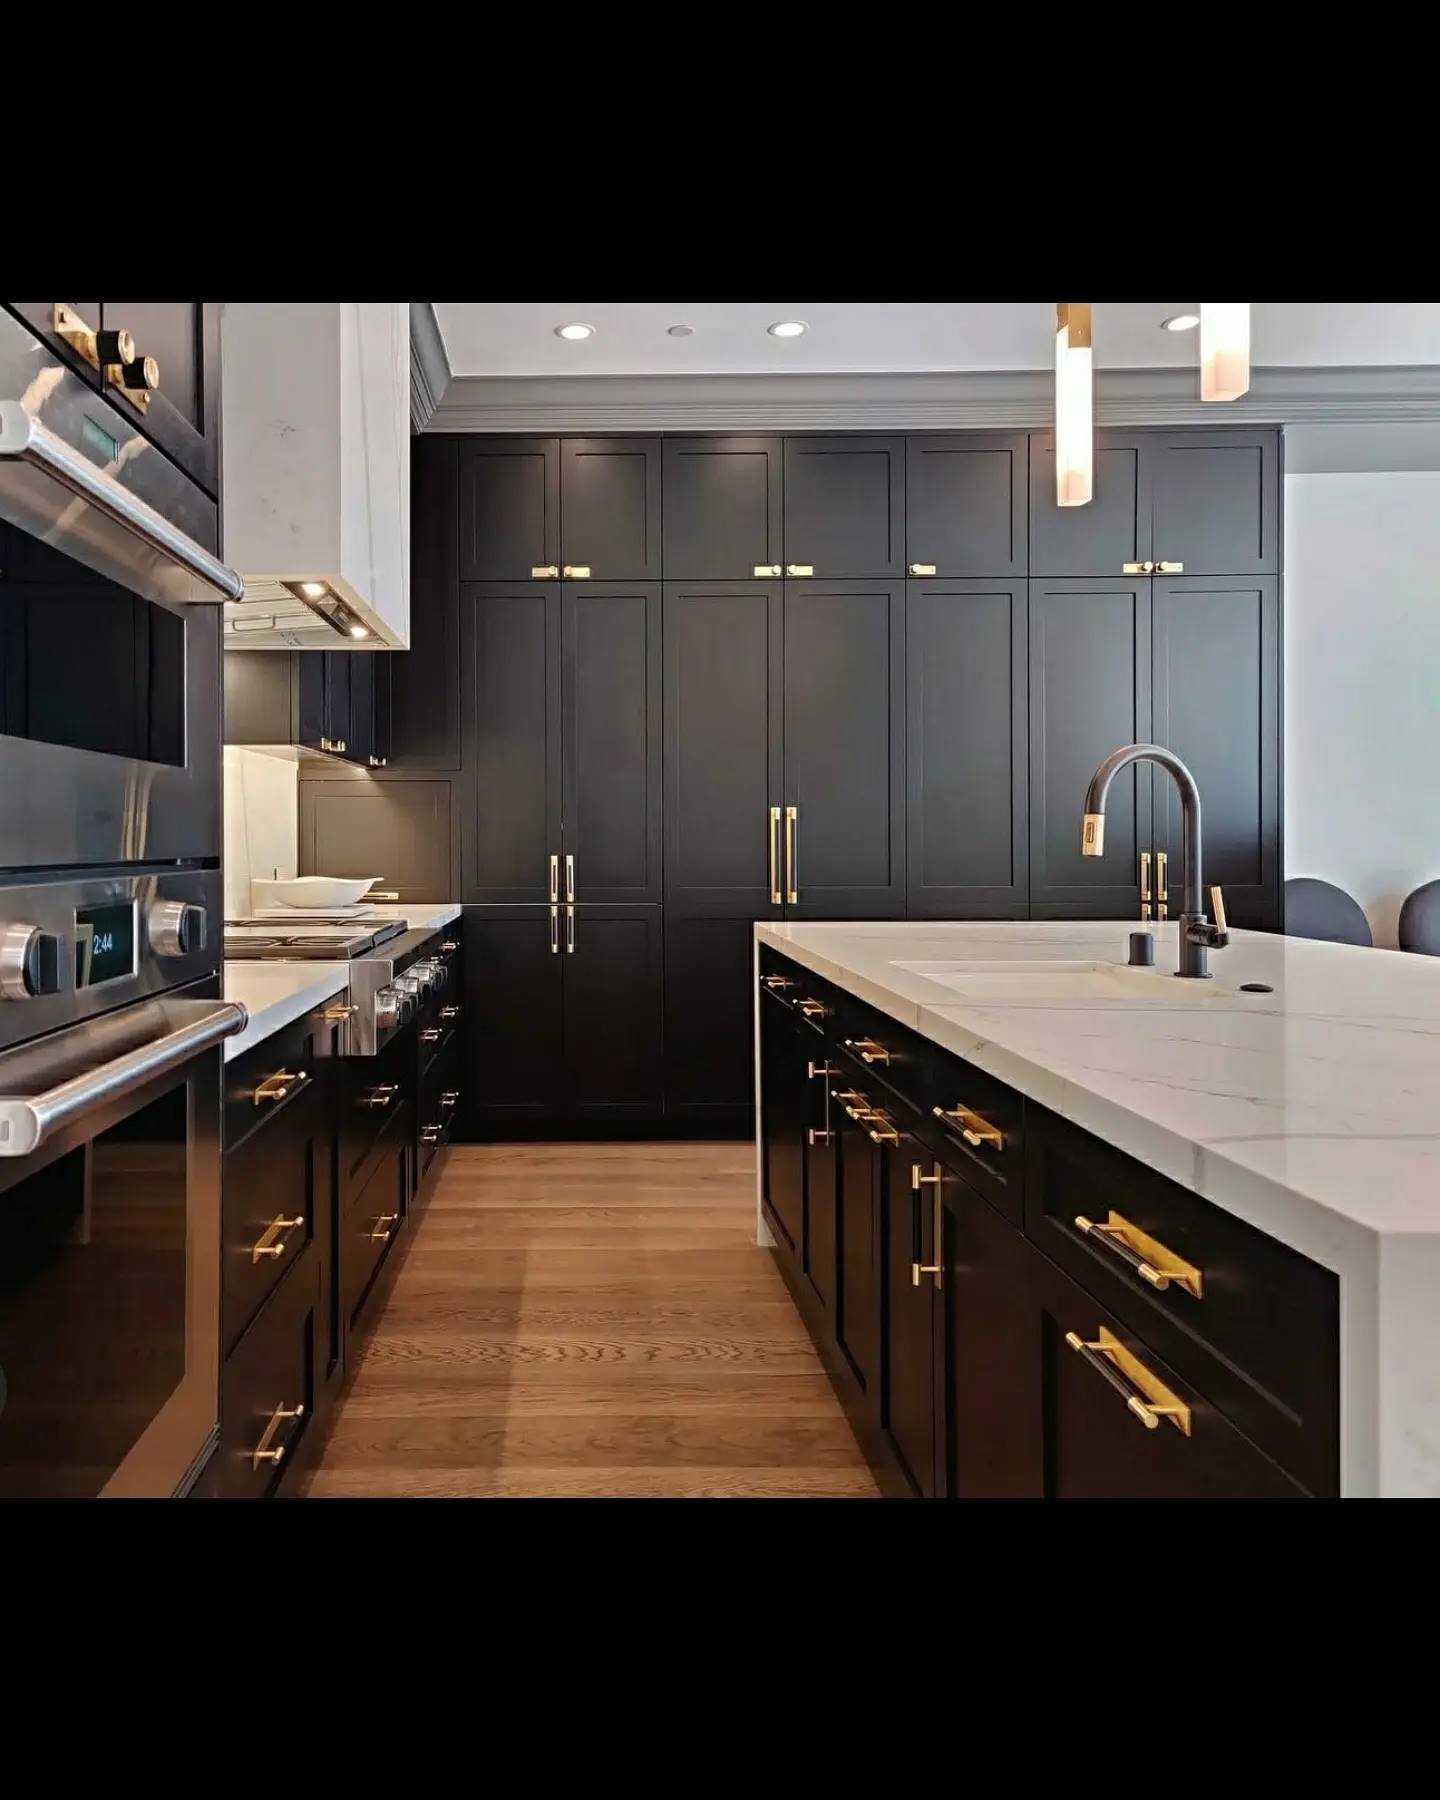 Now this is how you do a Black kitchen 🖤🌟

Take a look at the Recently completed Clay st project we have been very exited to share 👐🏹

#blackcabinets
#kitchendesign #kicthenremodel
#sanfranciscoconstruction #myohhardware #calcuttamarble #kitcheni